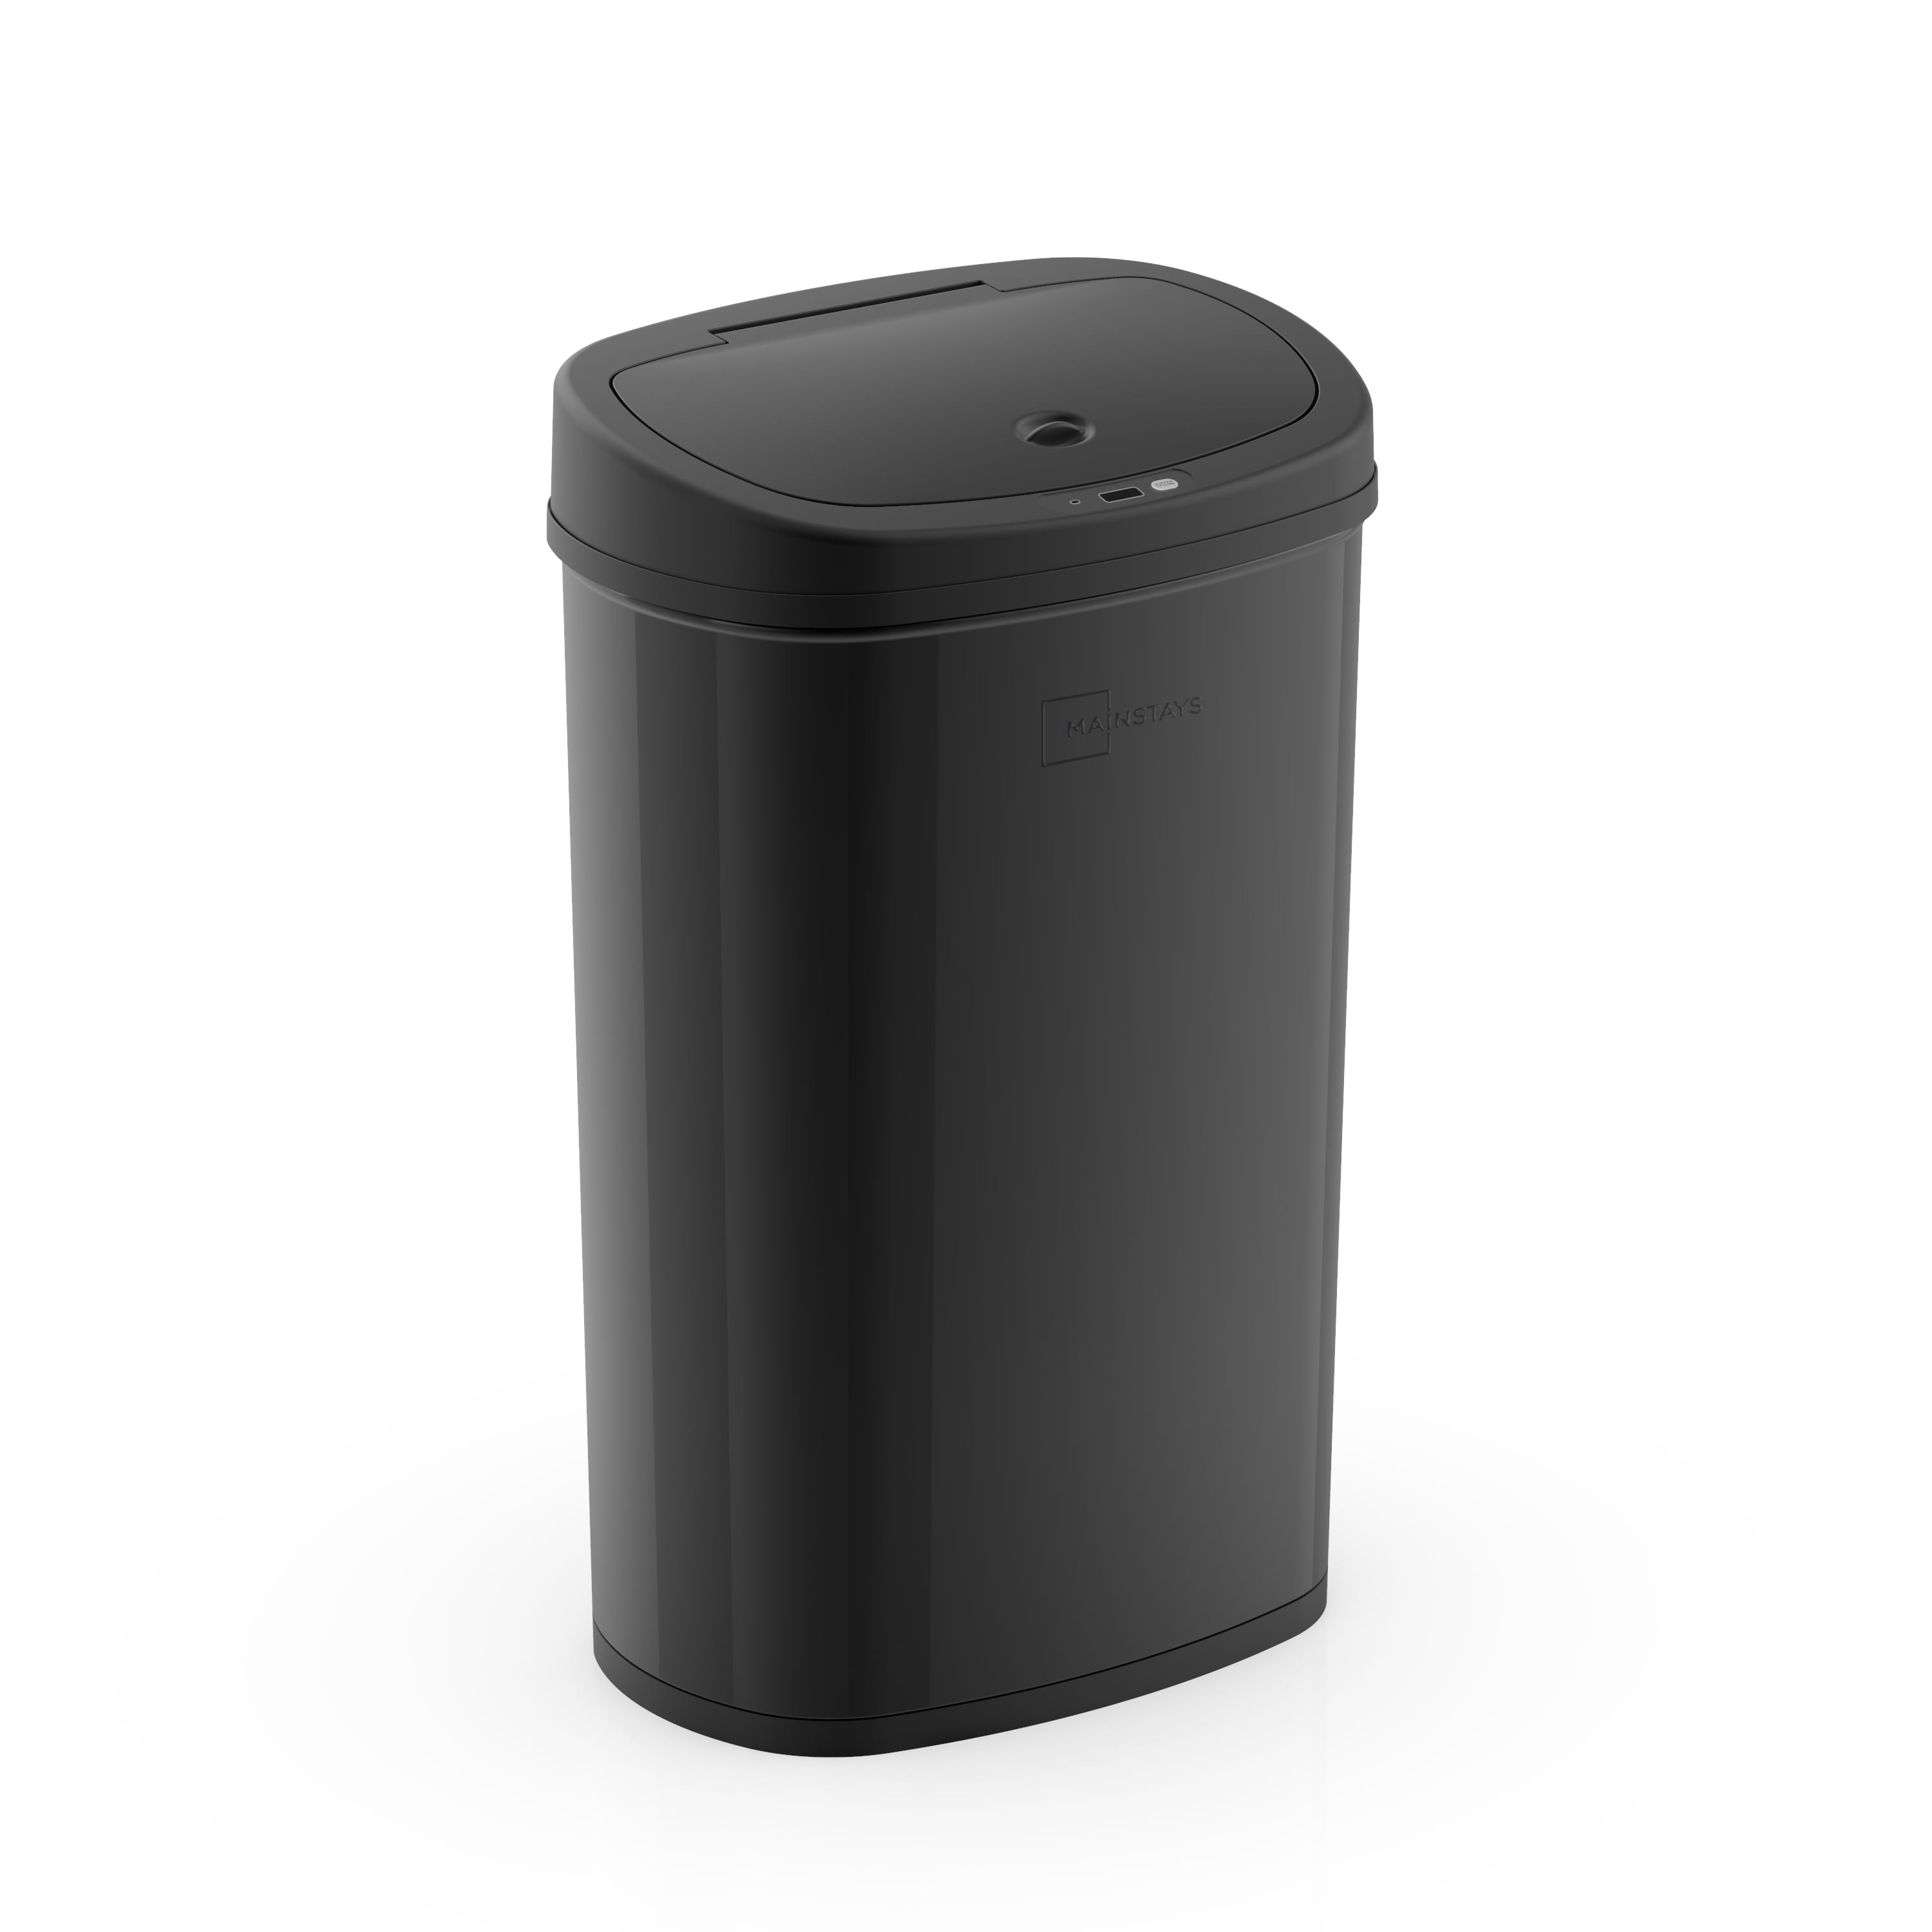 Trash Can 13 Gallon Motion Sensor Kitchen Garbage Can Stainless Steel 50L Black 